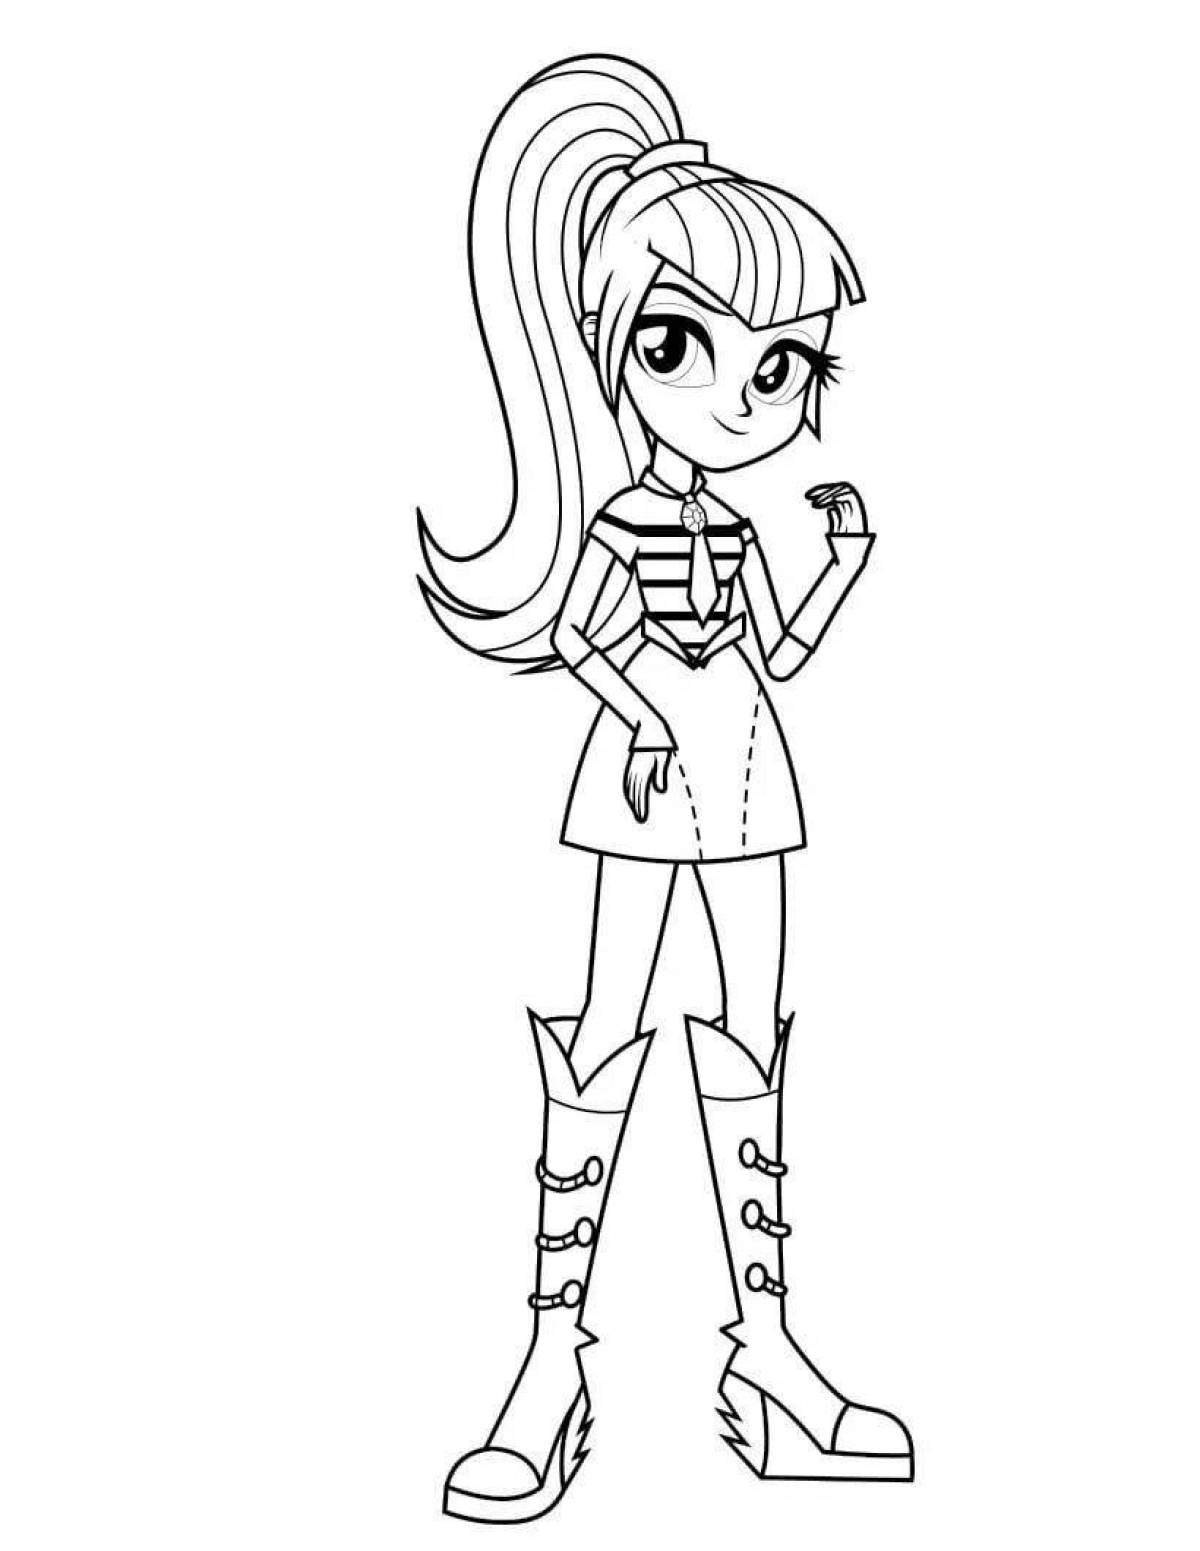 Rainbow Rock Coloring Page for Equestria Girls